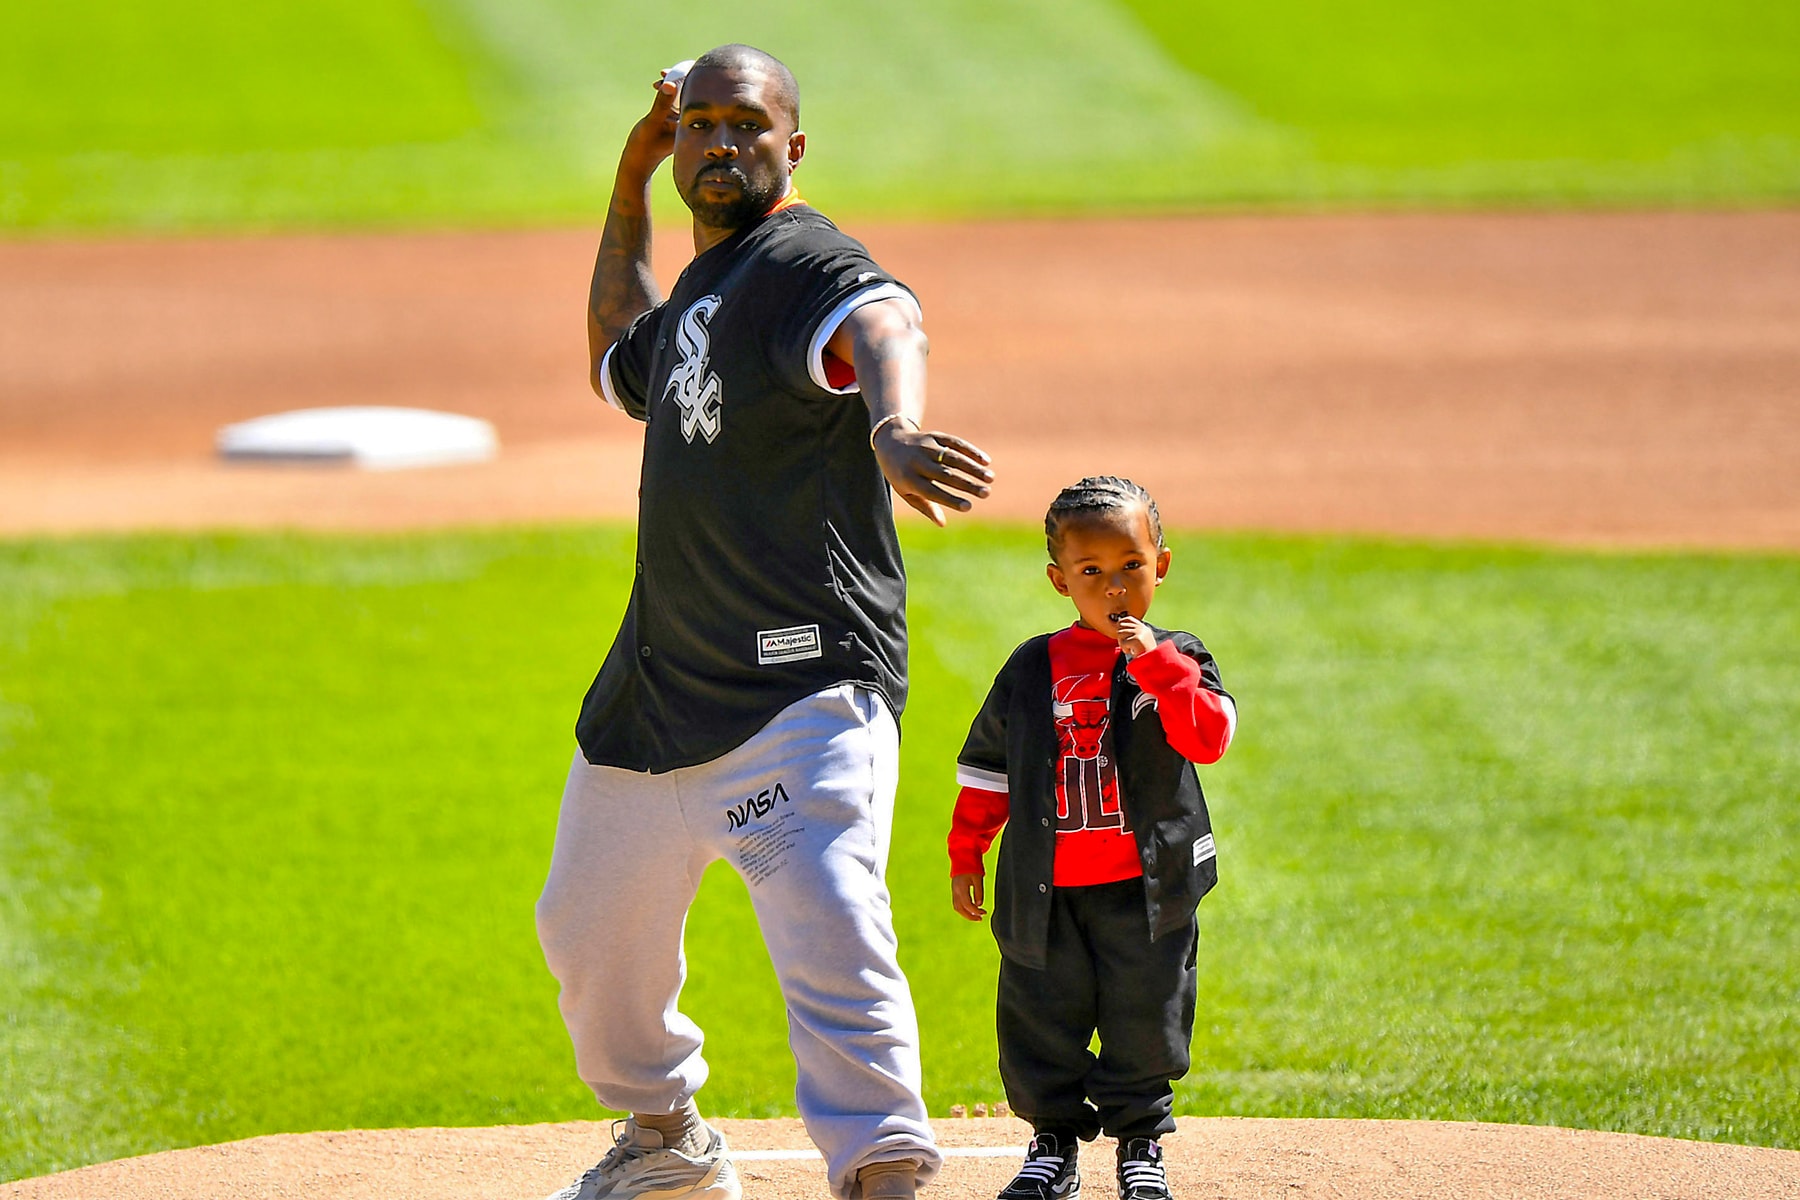 kanye west saint white sox game first pitch baseball video